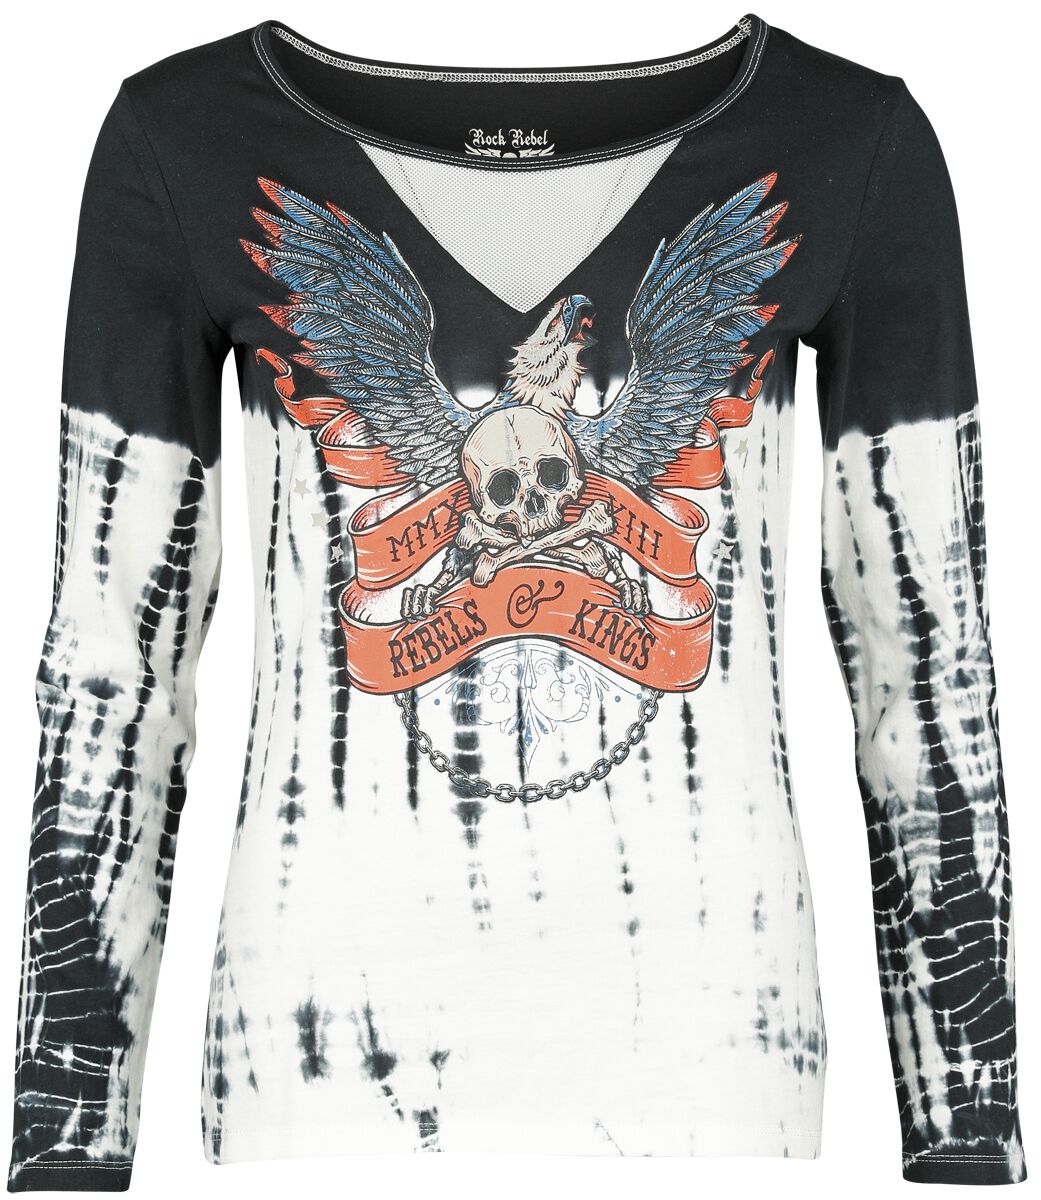 Image of Maglia Maniche Lunghe di Rock Rebel by EMP - Tie-dye long-sleeved top with large front print - L a XL - Donna - nero/bianco